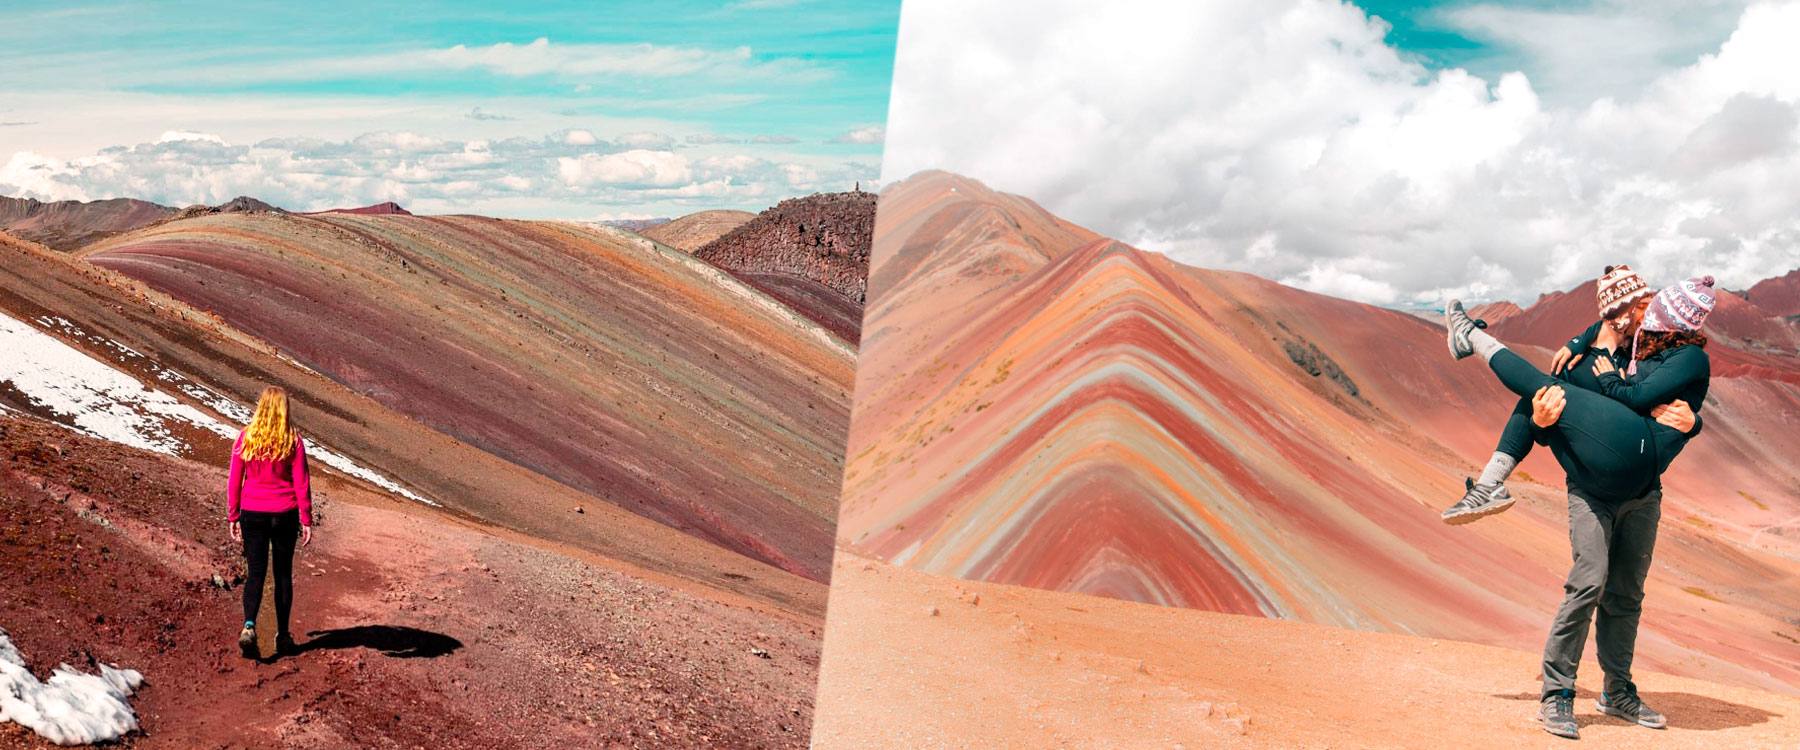 Difference Between Vinicunca and Palccoyo Rainbow Mountain	